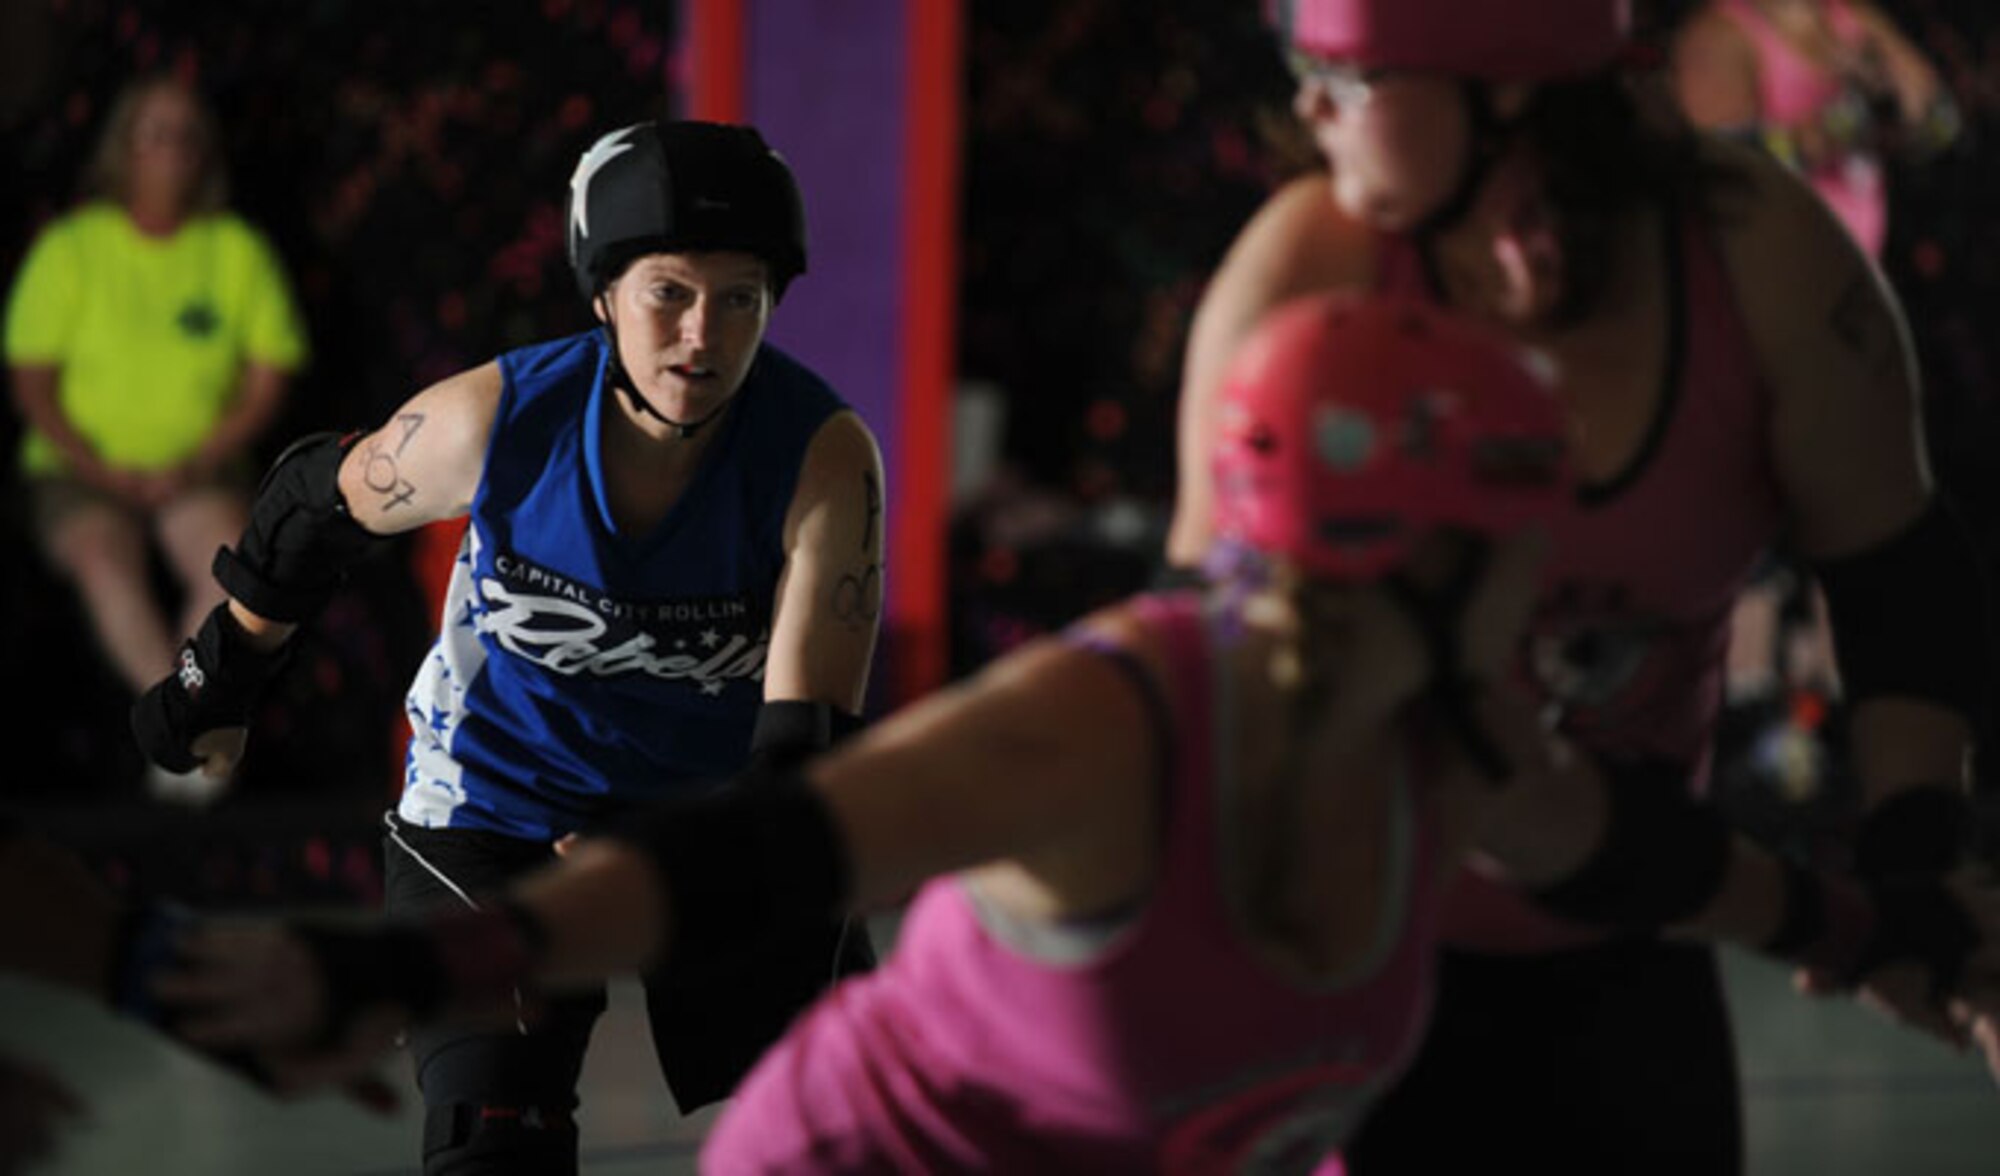 Lt. Col. Melanie Friedman, Curtis E. Lemay Center for Doctrine Development and Education deputy director of intelligence, gets ready to ‘jam’ past her opponents during the Capitol City Rollin’ Rebels and Mobile Derby Darlins’ roller derby bout Aug. 9, 2014. Friedman is a utility player for the Capitol City Rollin’ Rebels meaning she can play the position of blocker or jammer. The jammers job is to score points by lapping around or through the blockers. The blockers must stop the opposing team’s jammer from lapping, and help their own team’s jammer score points. (U.S. Air Force photo by Staff Sgt. Natasha Stannard)